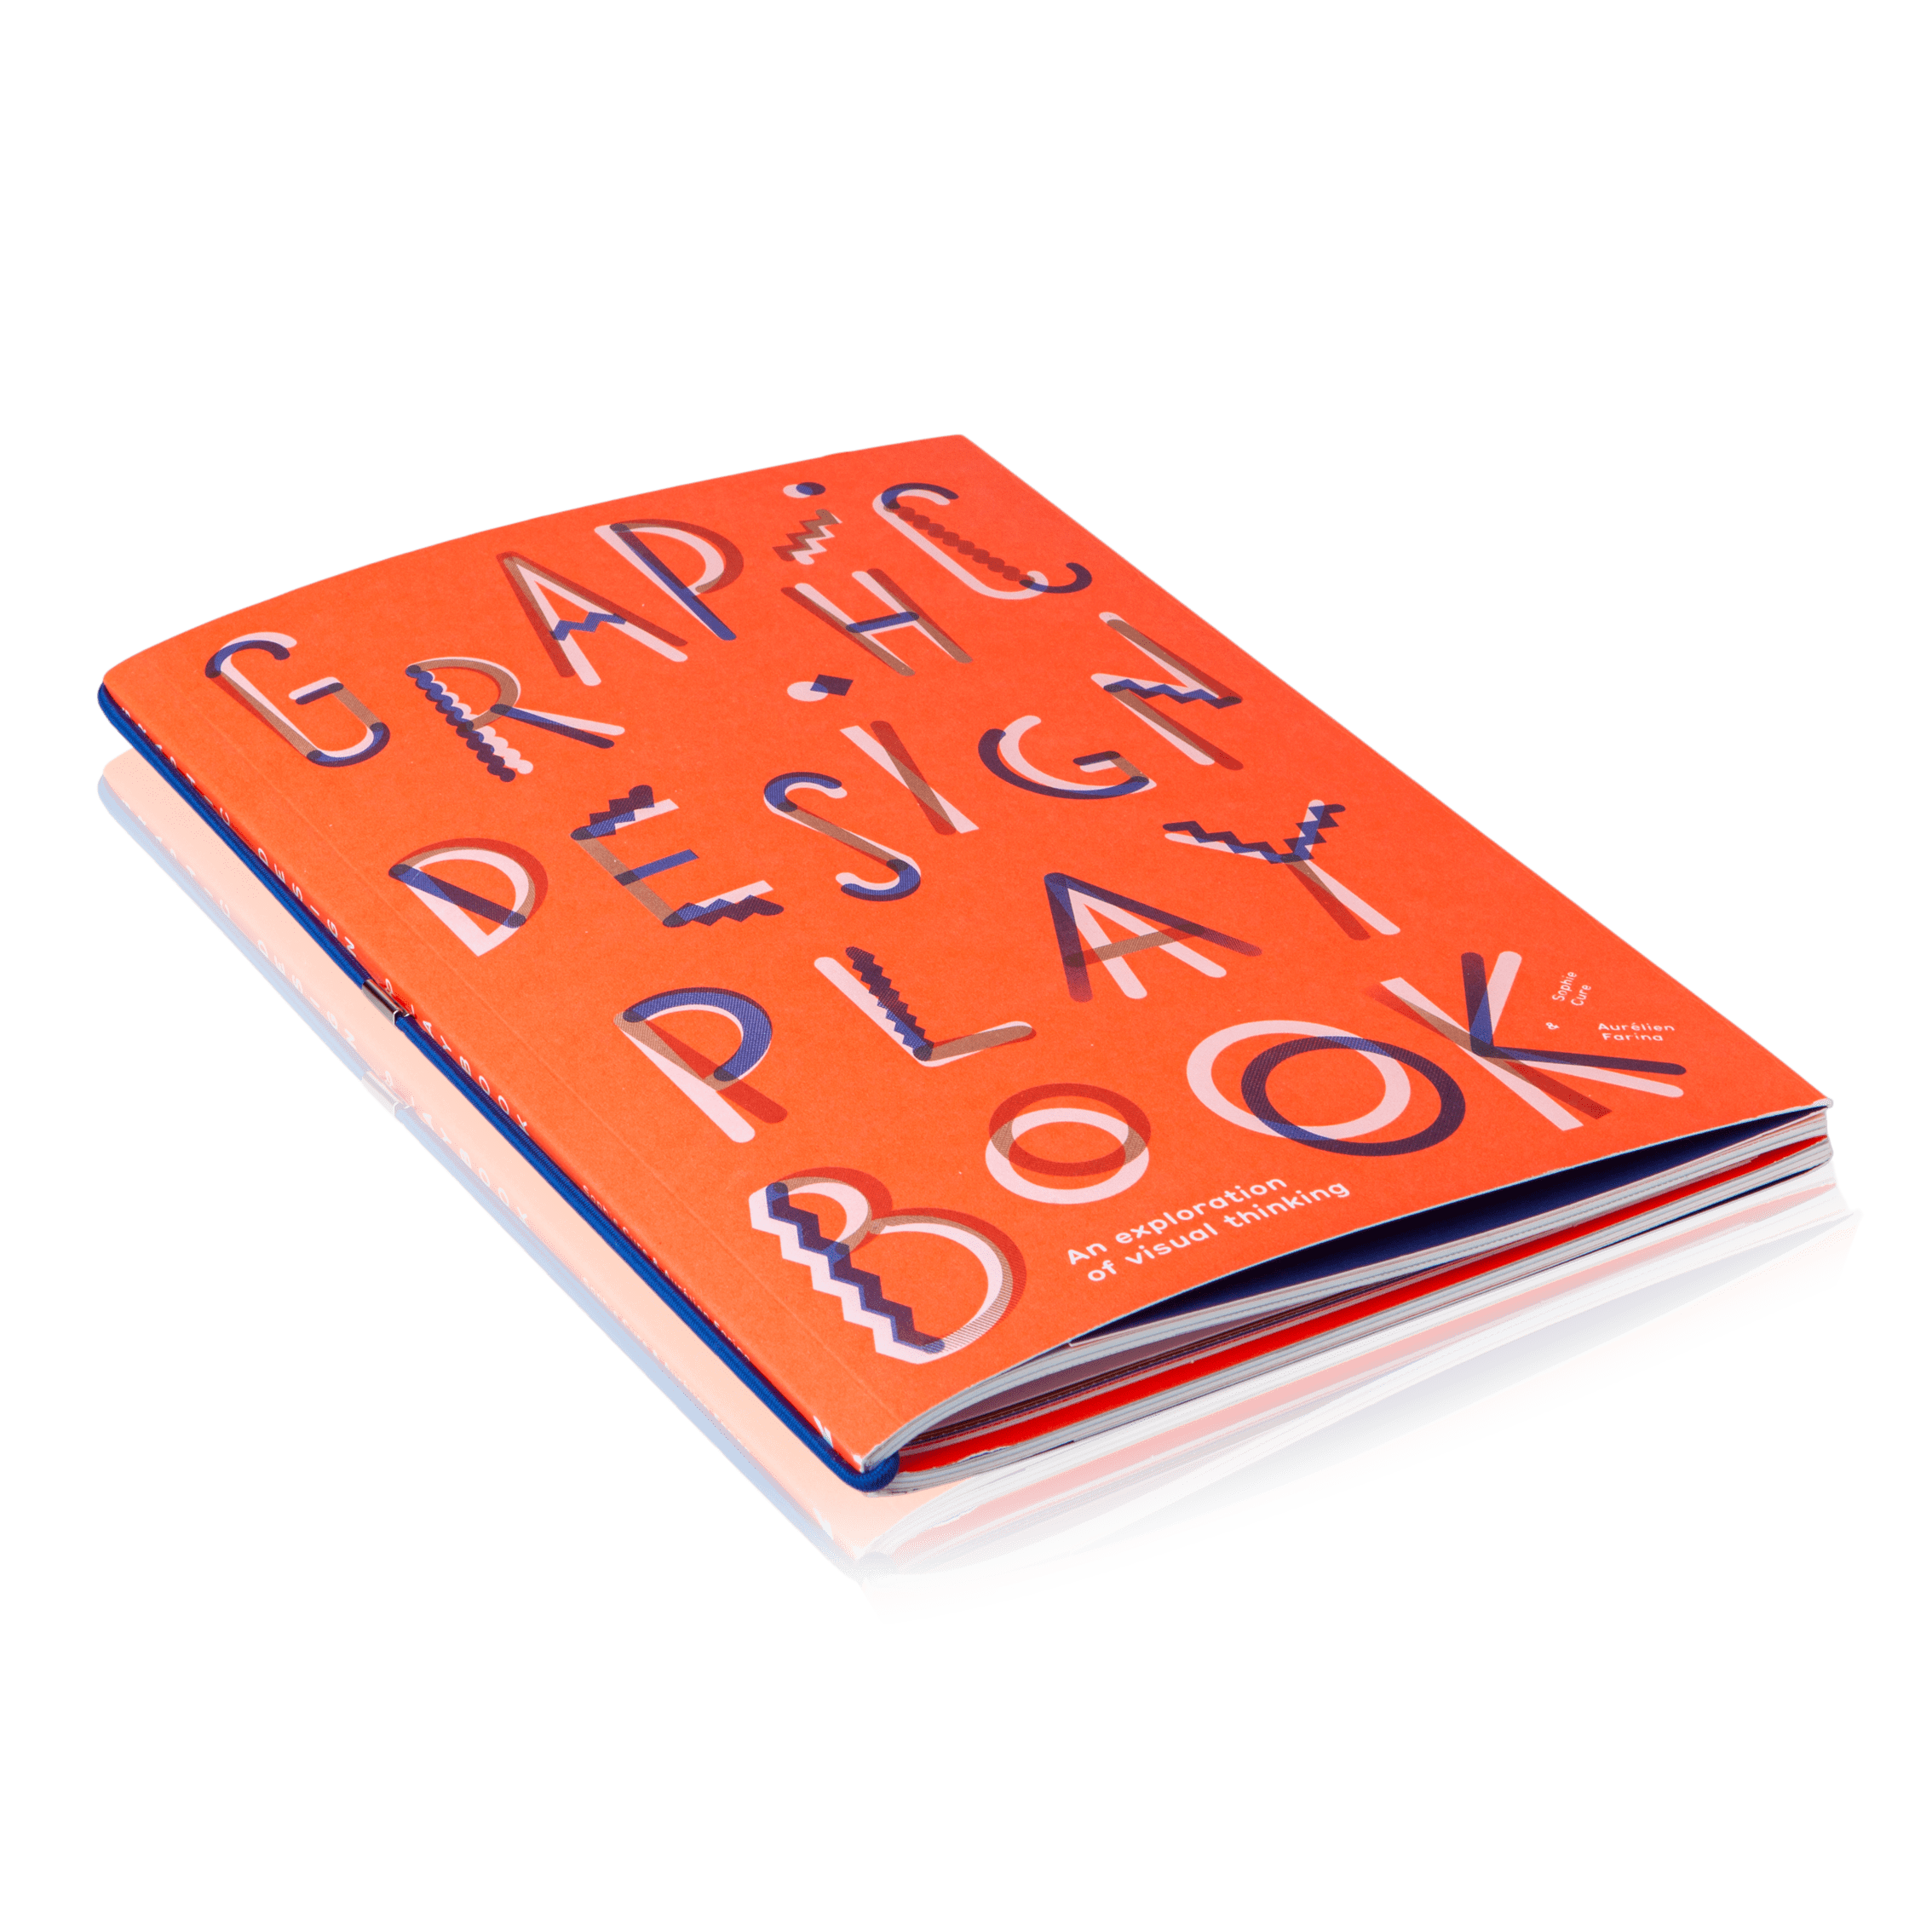 Thinking　Play　Art　Play　Exploration　of　Book:　of　Graphic　Visual　Design　An